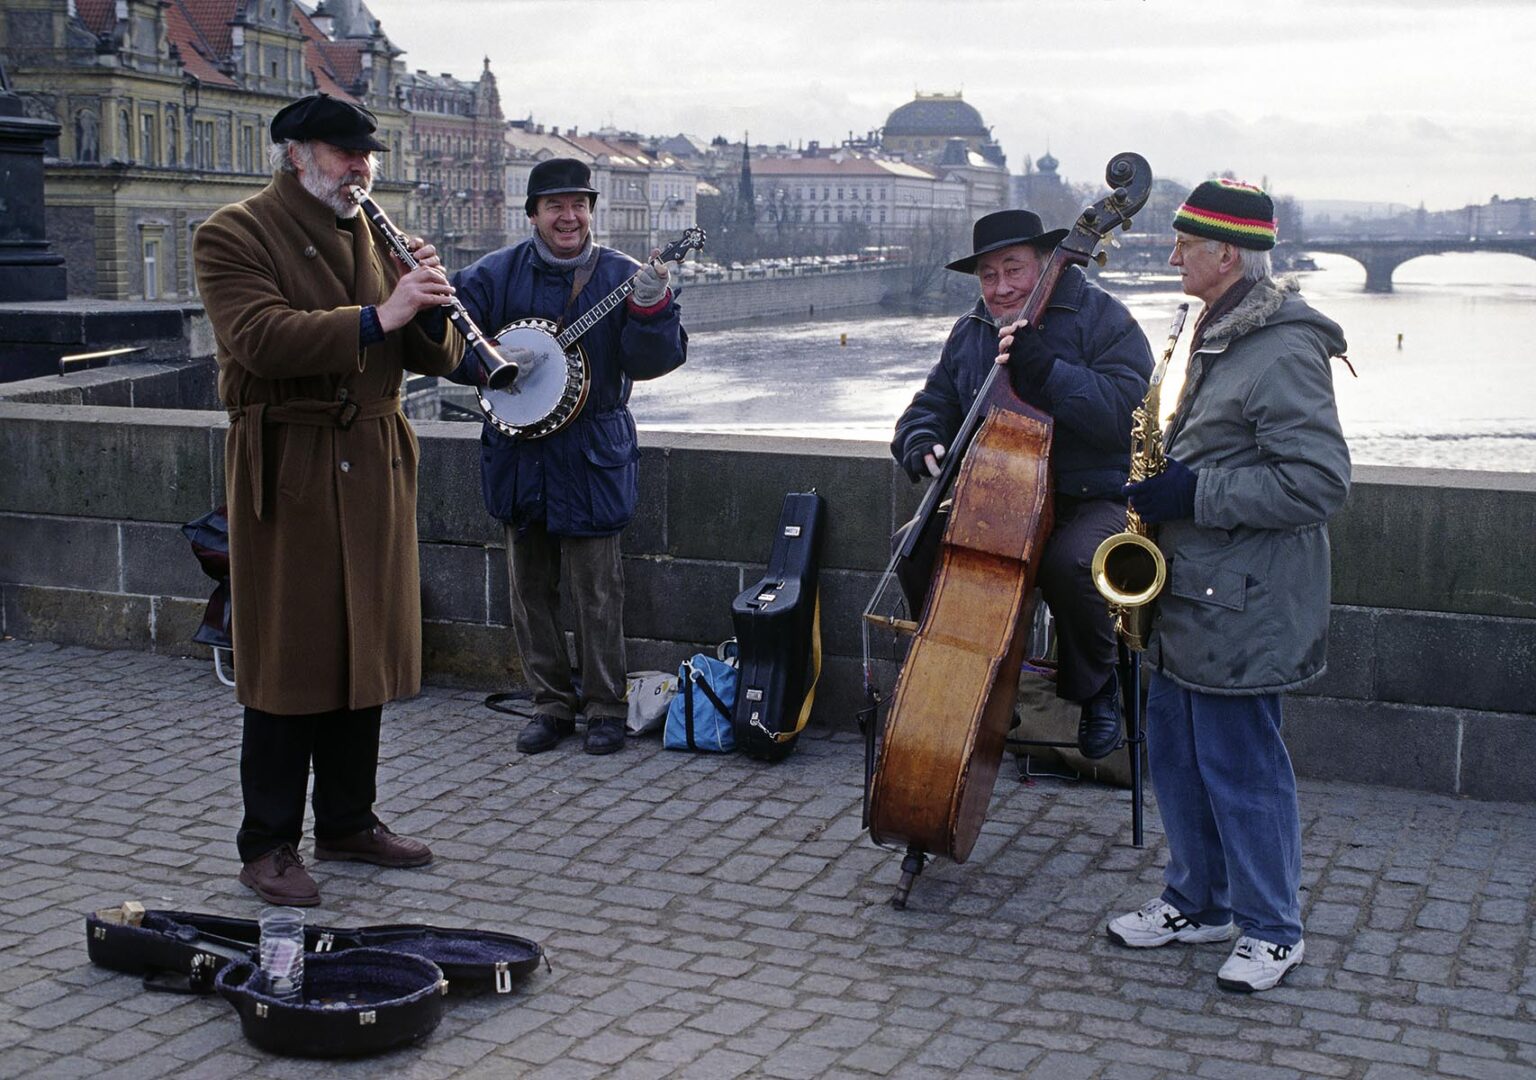 MUSICIANS play for change on the CHARLES BRIDGE (KARLUV MOST) built in 1357 by CARLO the 4th - PRAGUE, CZECH REPUBLIC